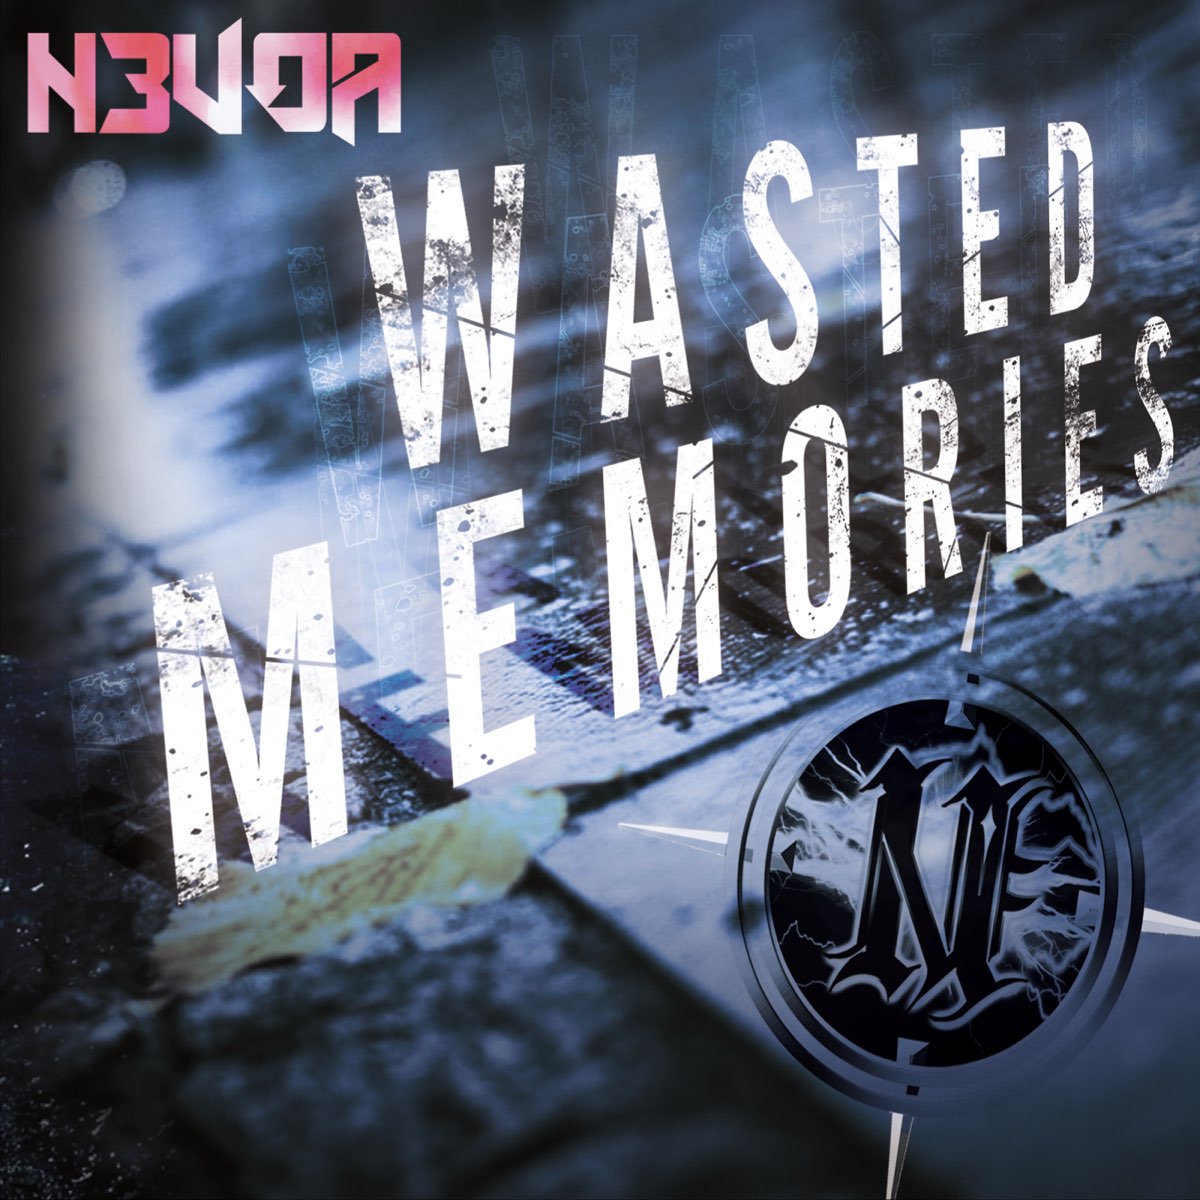 N3voa EBM logo Music Band. Decoded feedback. Time is wasted Memories are Erased. Хаос о Меморис слушать.